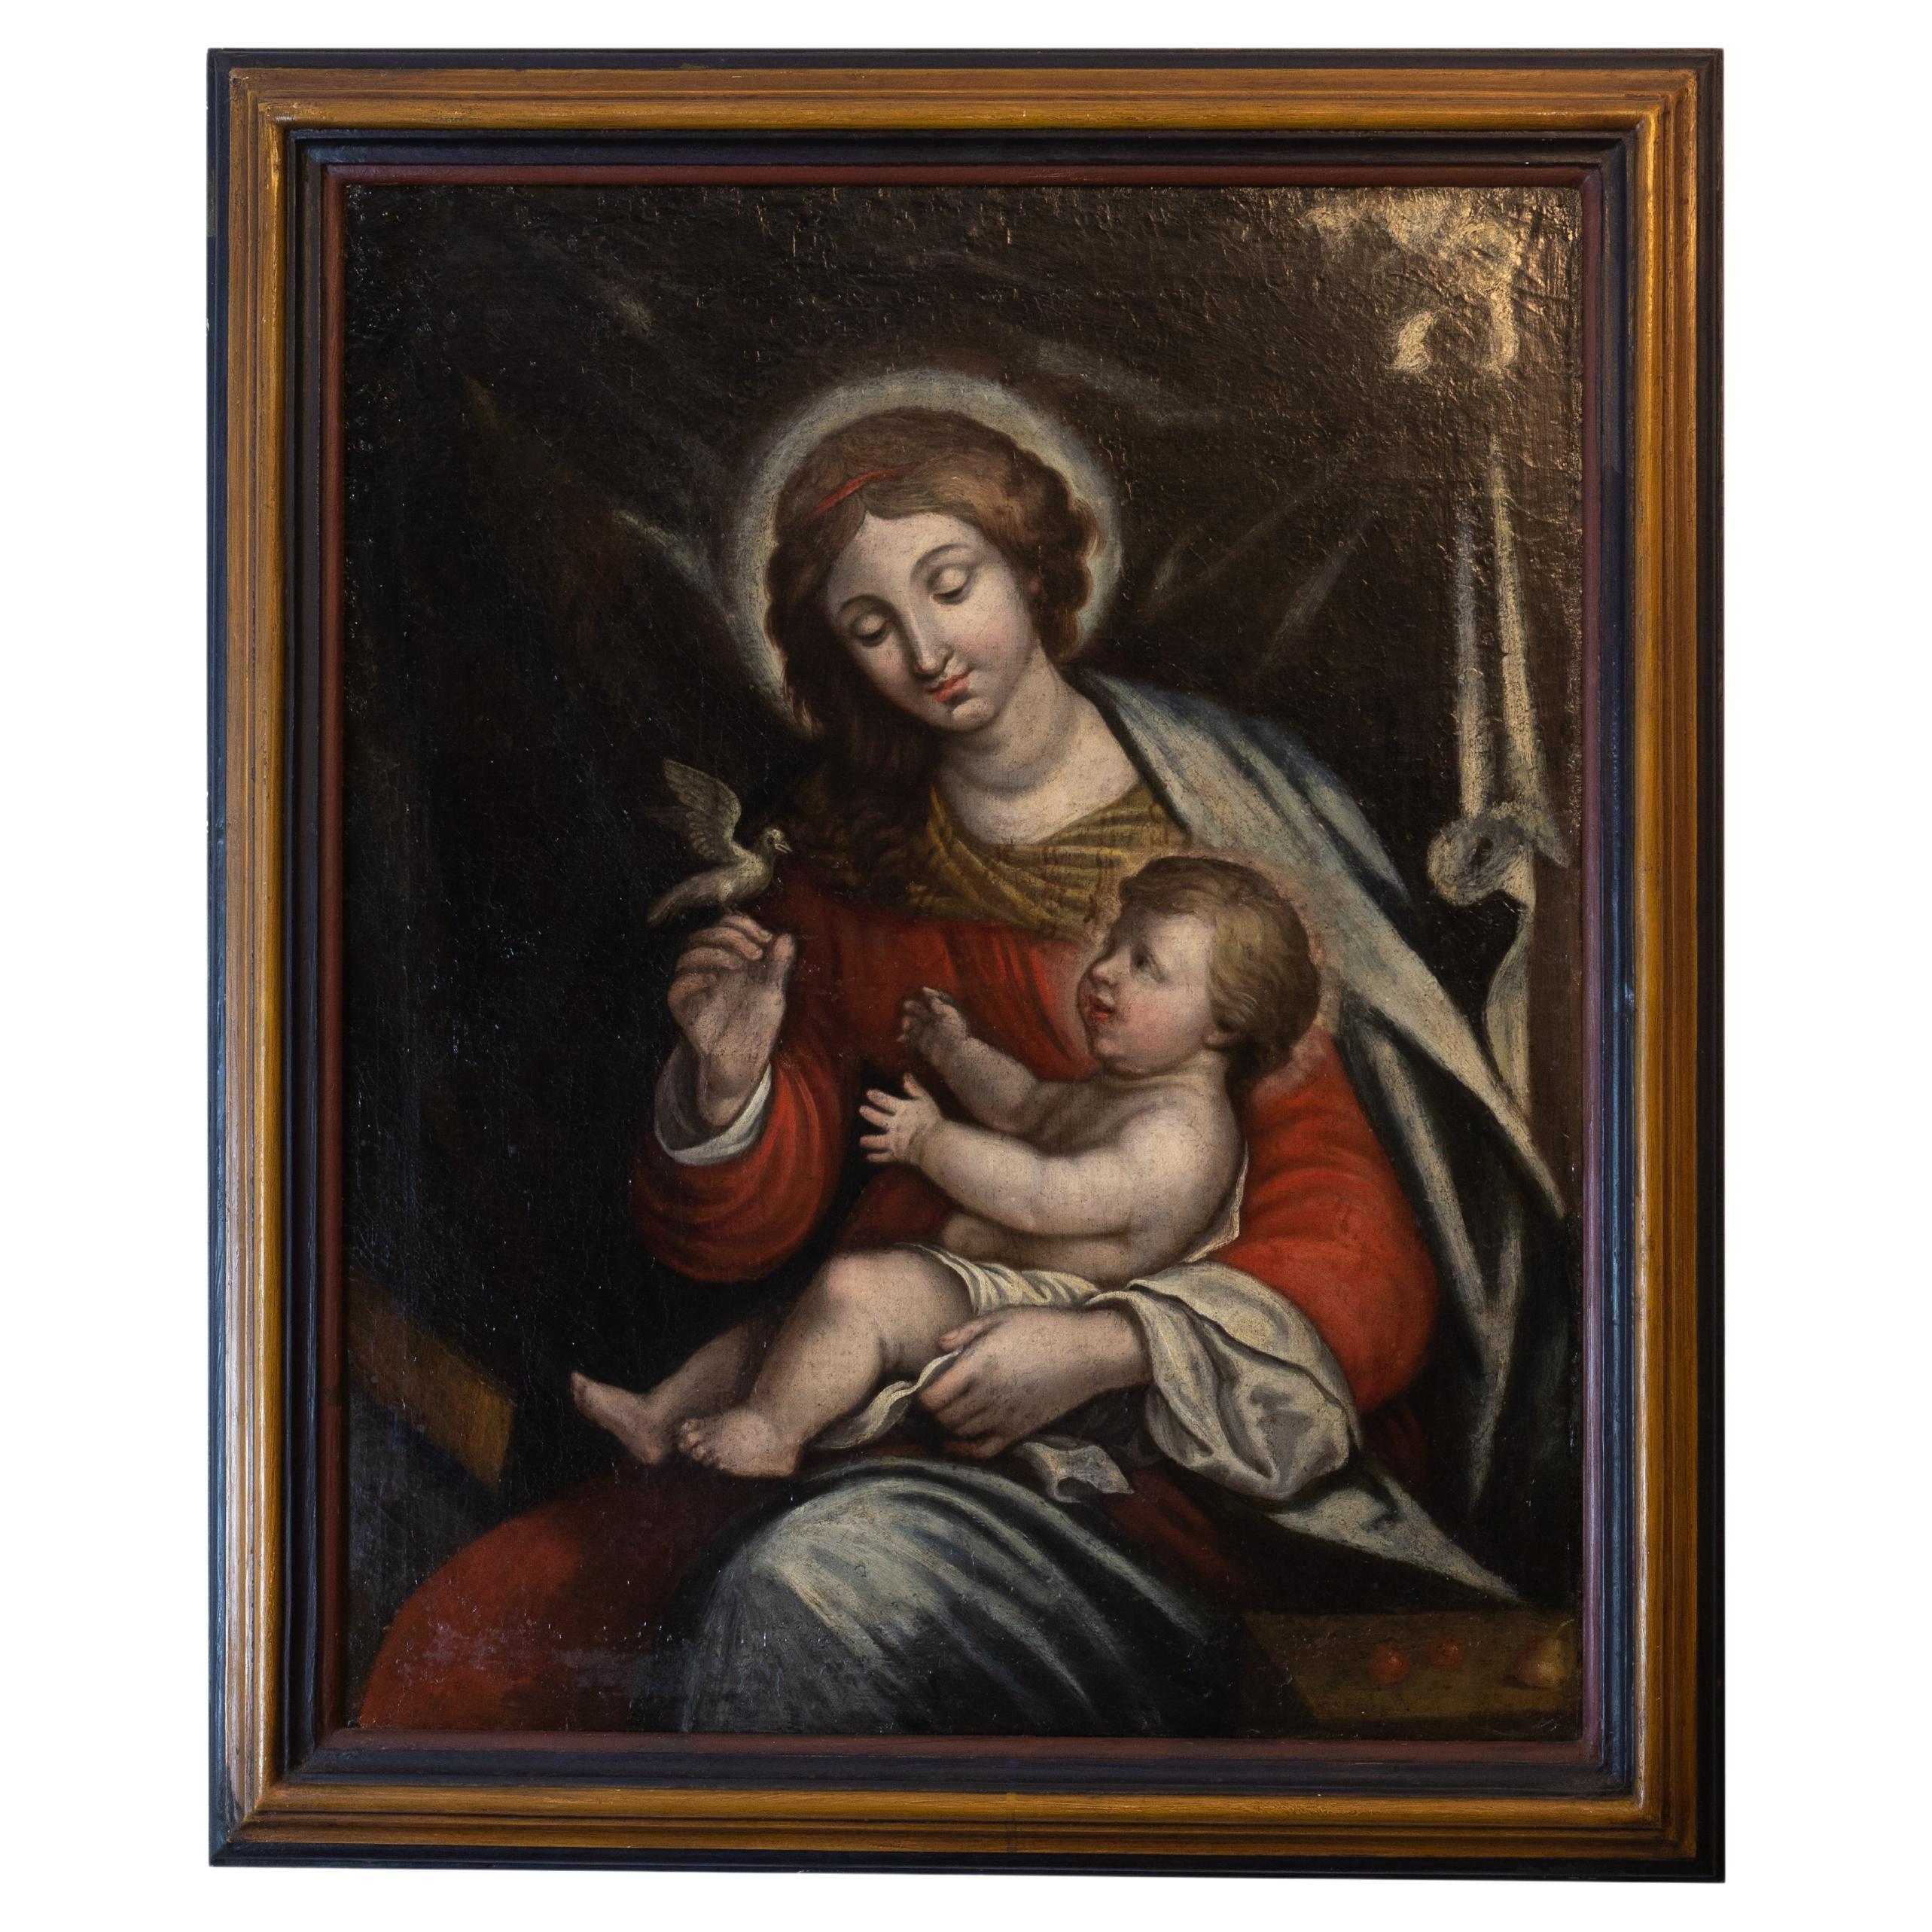 Italian Renaissance Painting of Our Lady of Peace, 18th Century Religious Art